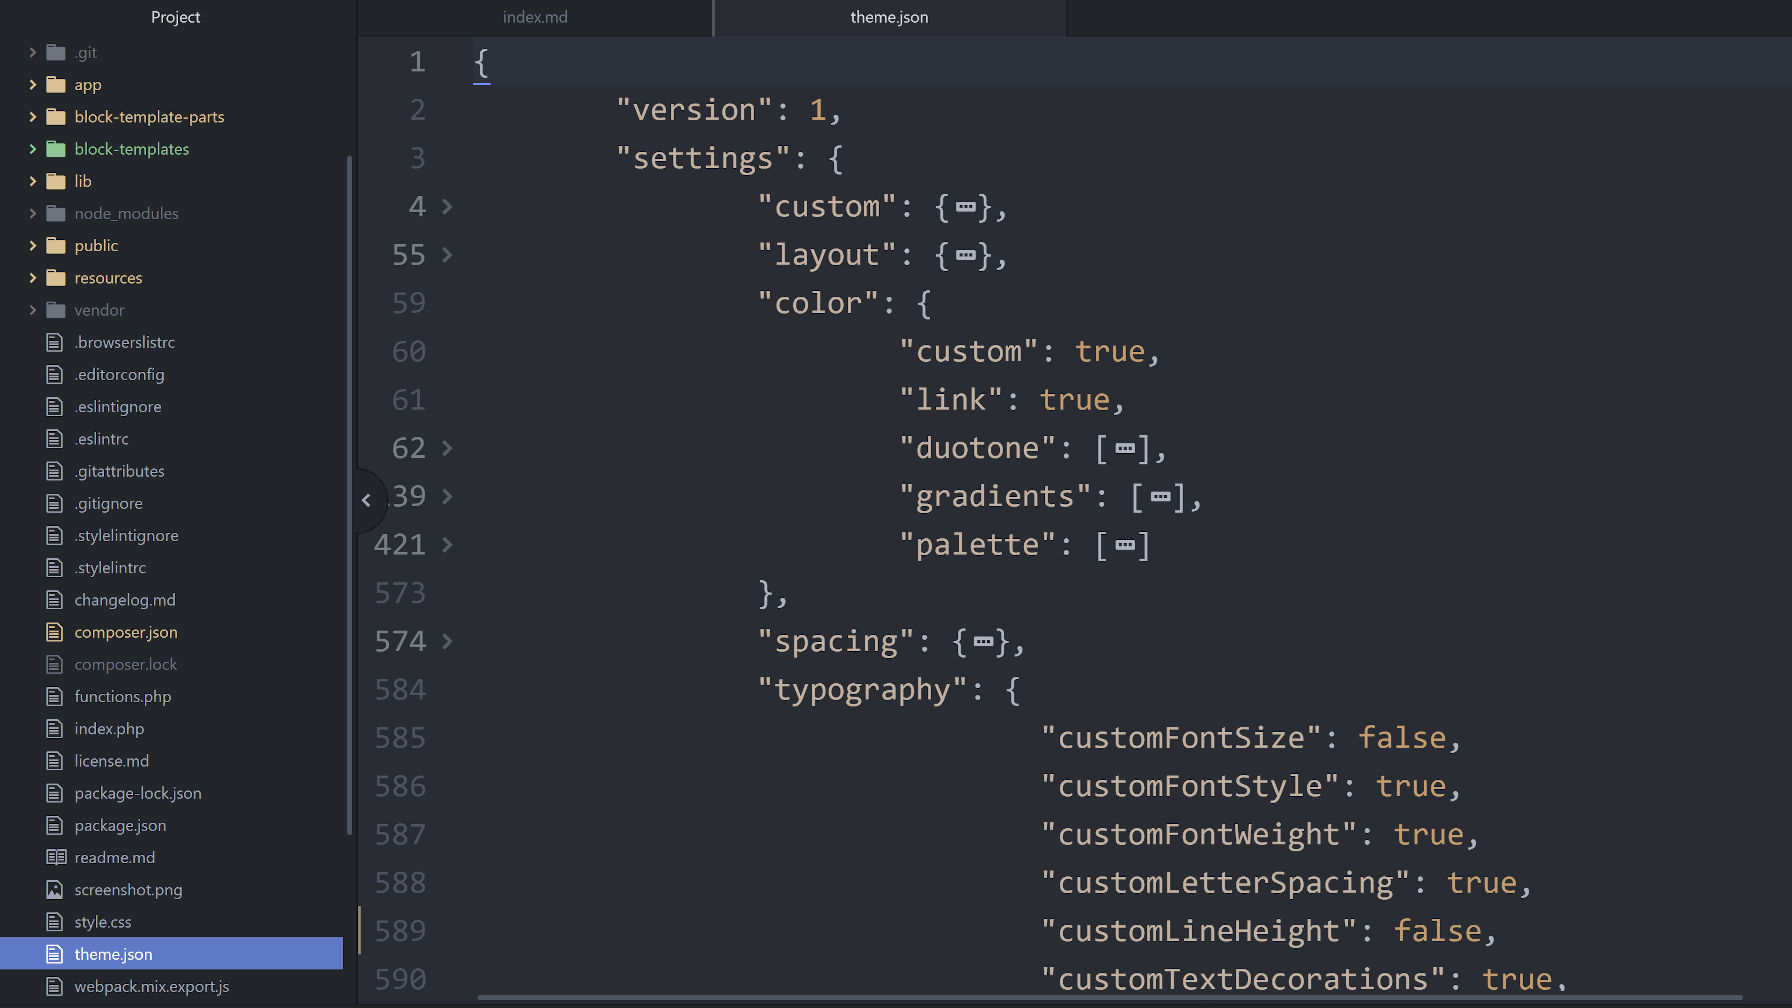 Screenshot of a theme.json file in a code editor.